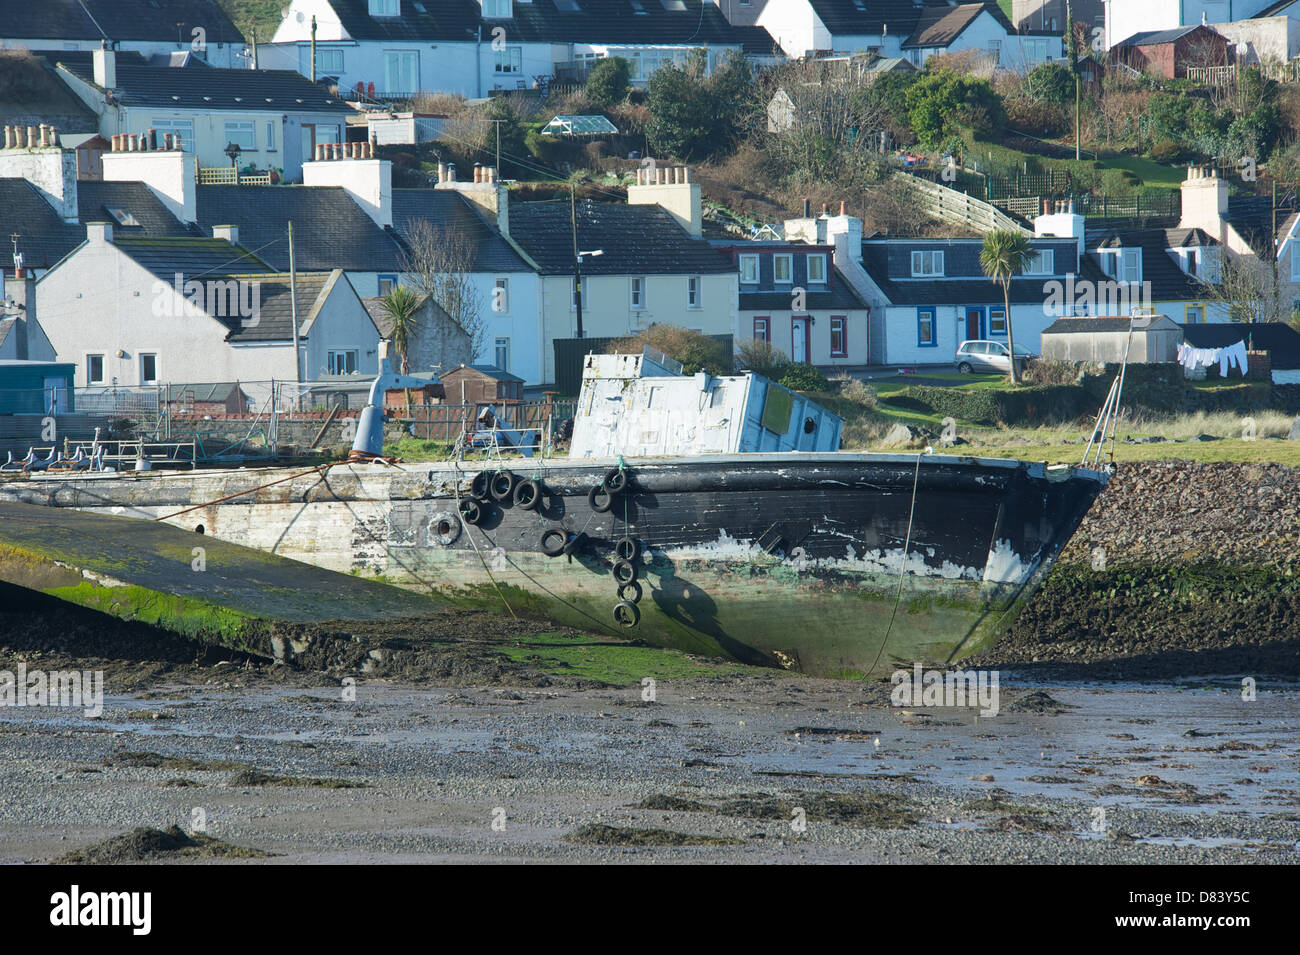 The remains of HMS Pagham, at Drummore harbour, The Rhines, Dumfries and Galloway, Scotland, where she awaits her fate. Stock Photo